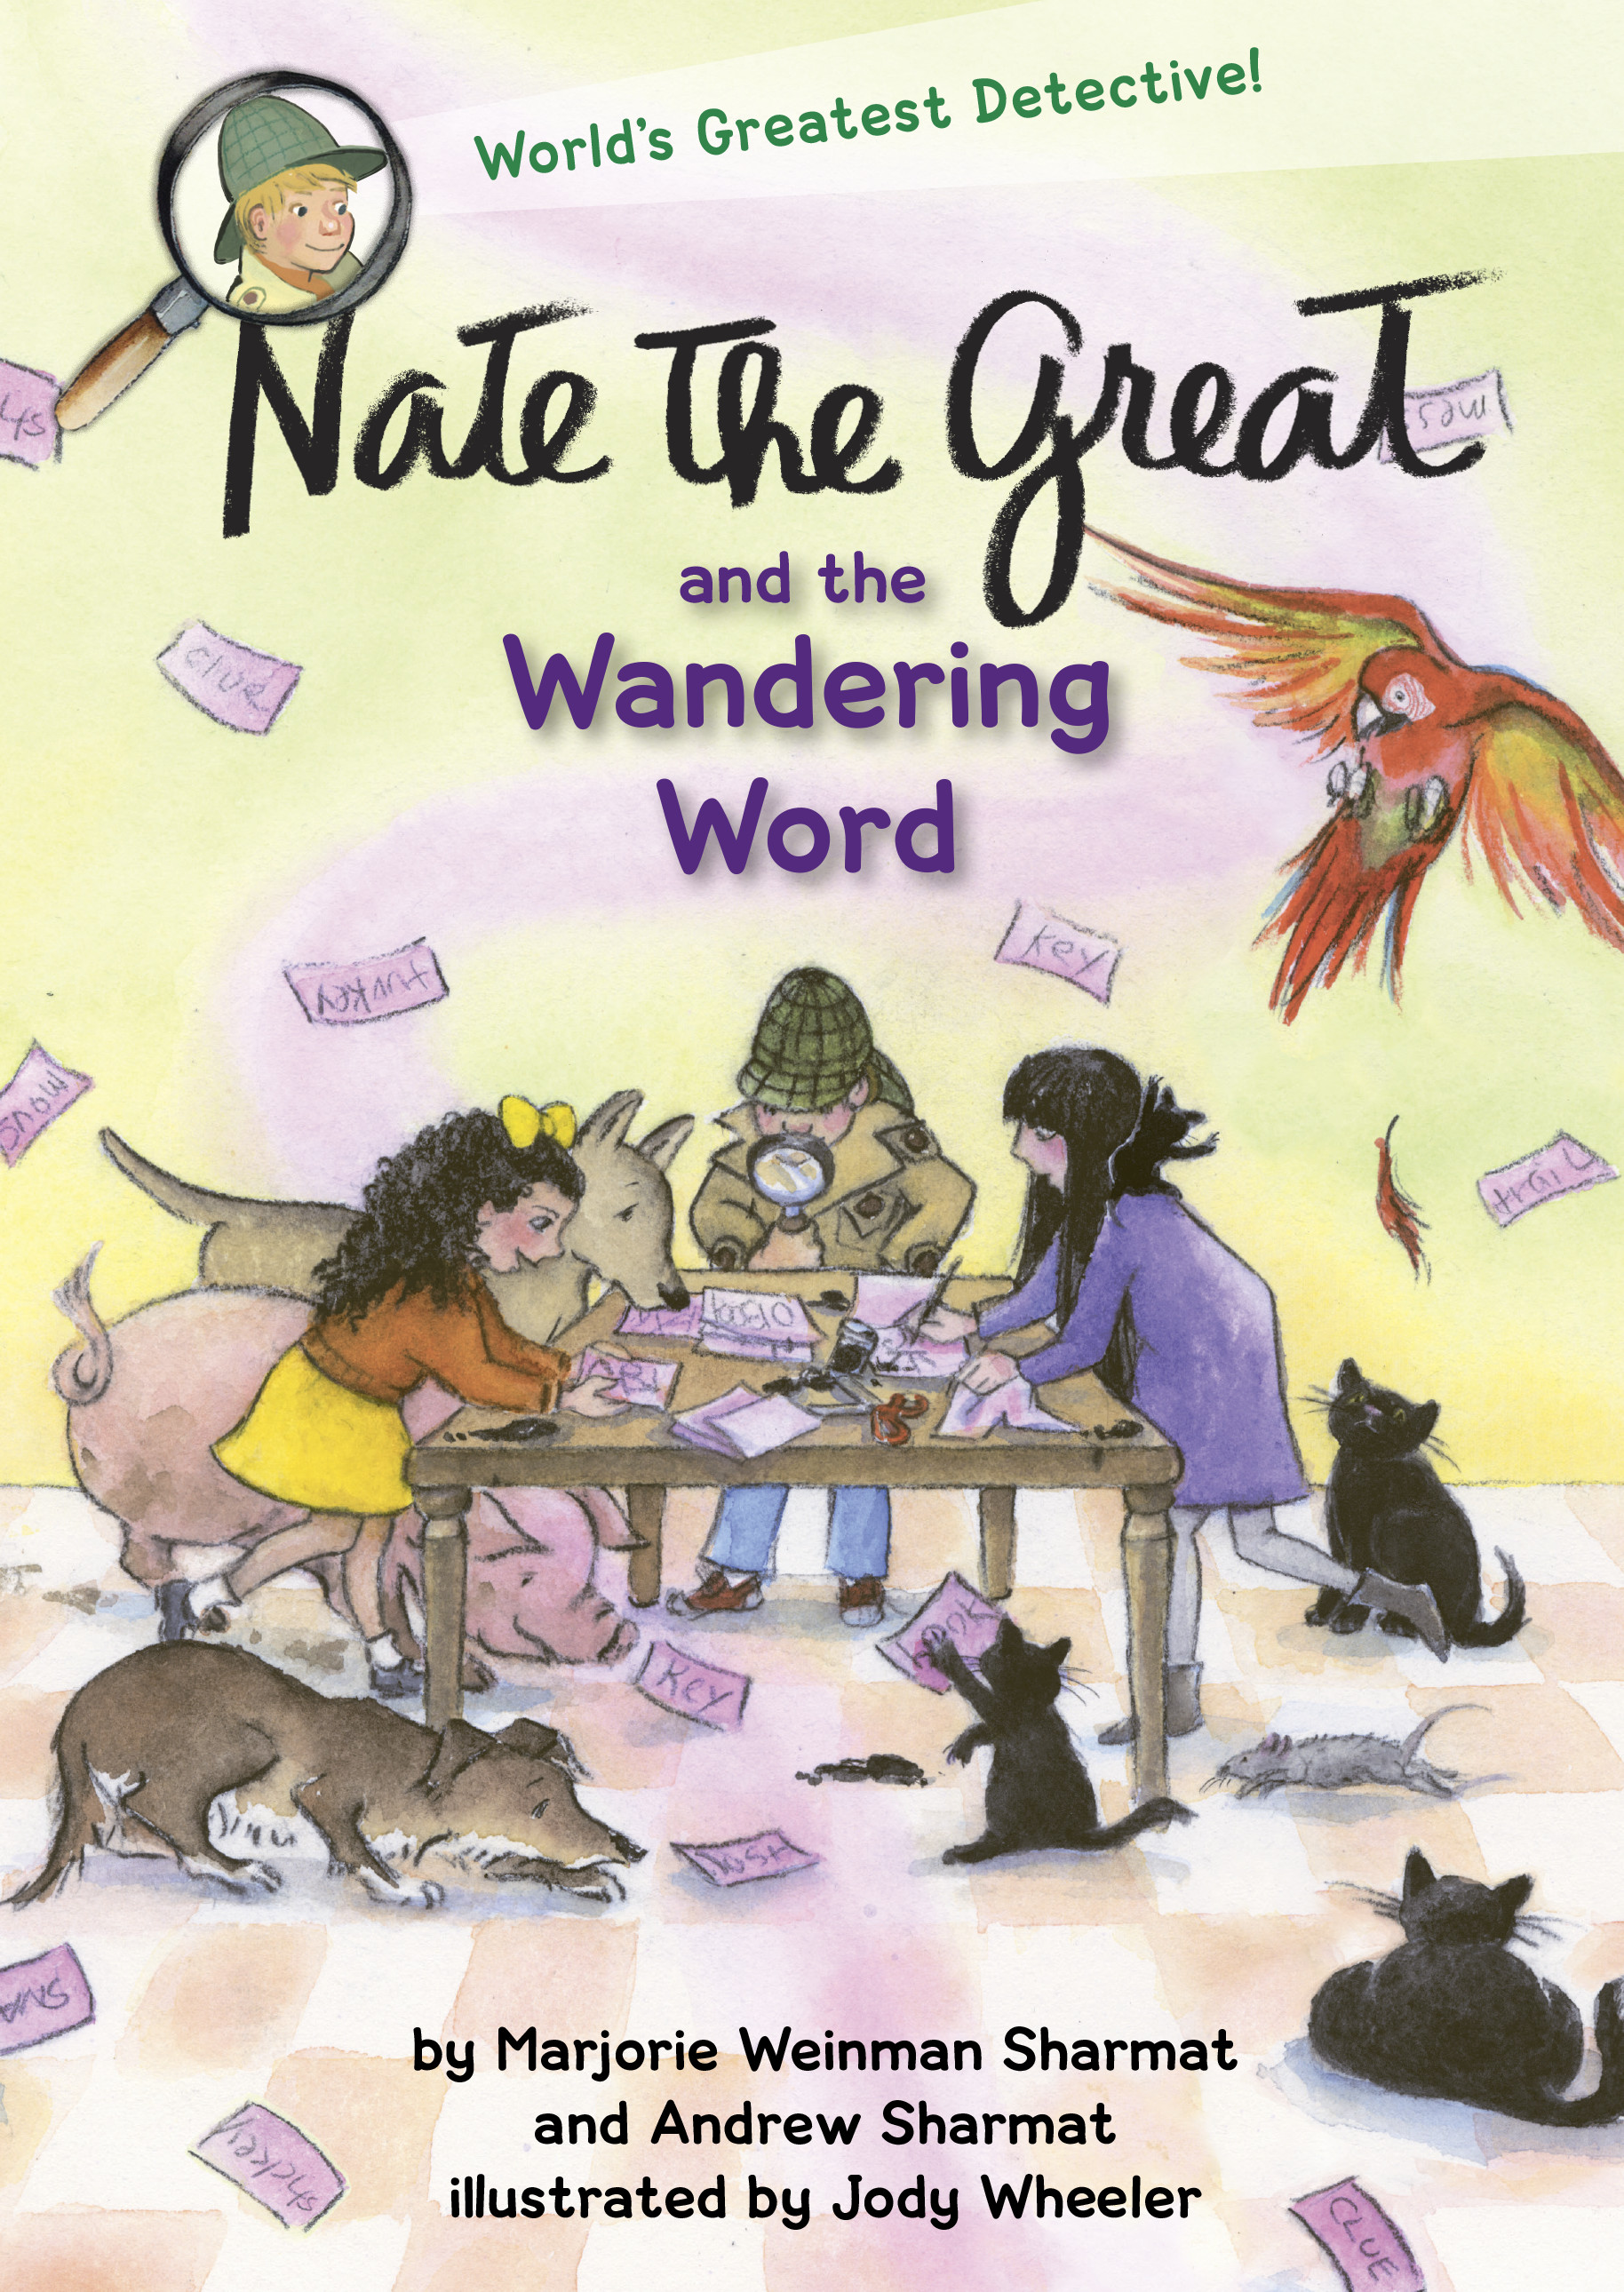 Nate the Great by Marjorie Weinman Sharmat